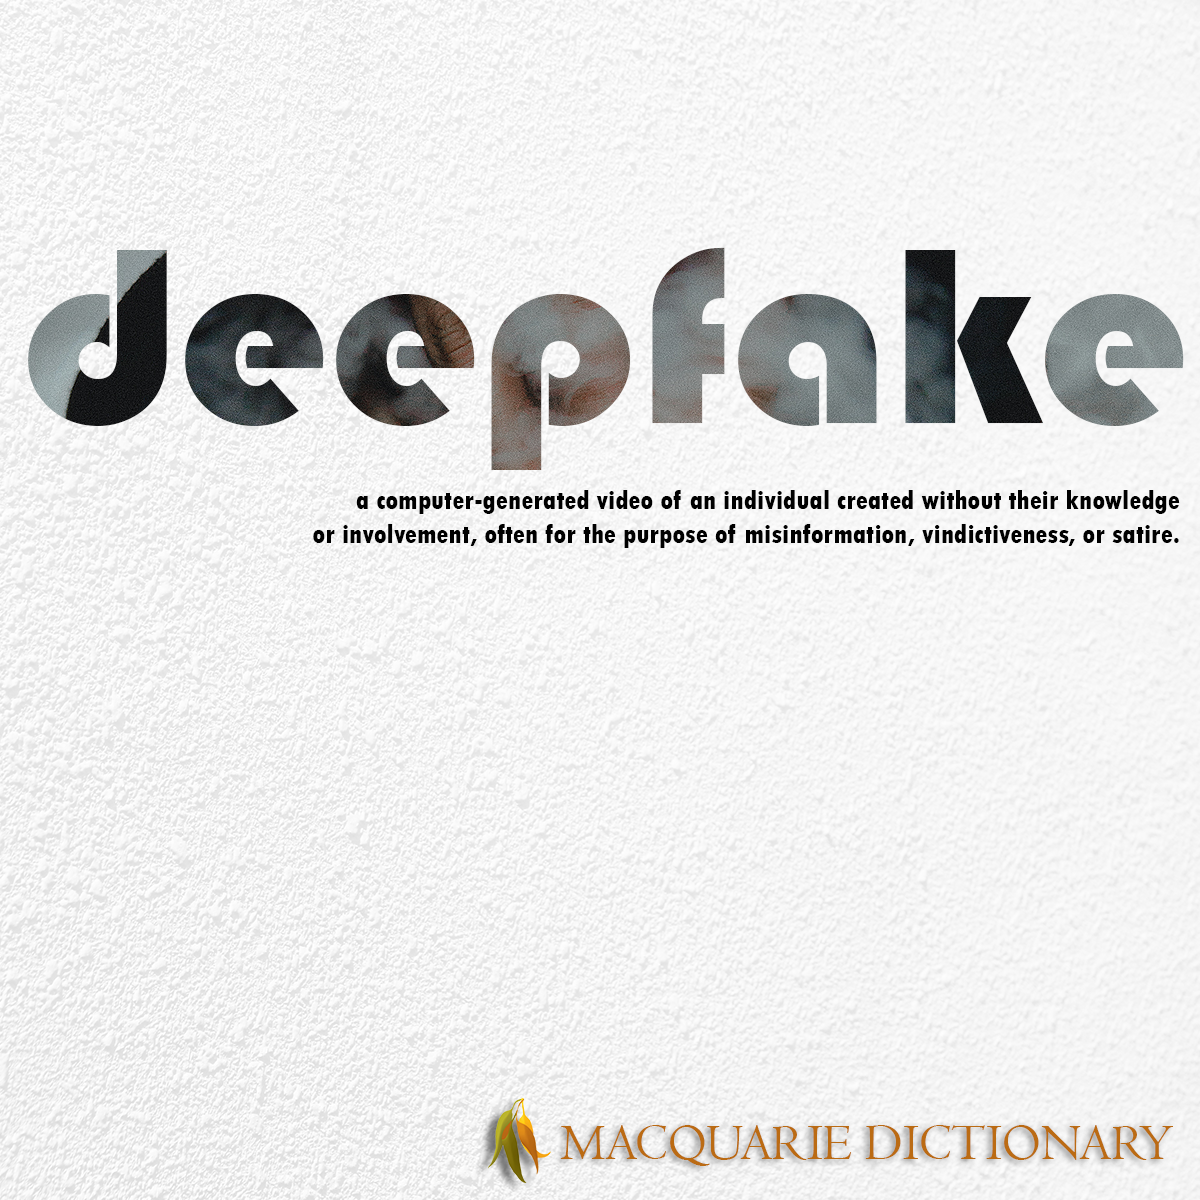 Image of Macquarie Dictionary Word of the Year - deepfake - a video of a computer-generated likeness of an individual, created using deep learning without the individual’s knowledge, often for the purpose of misinformation, vindictiveness, or satire.